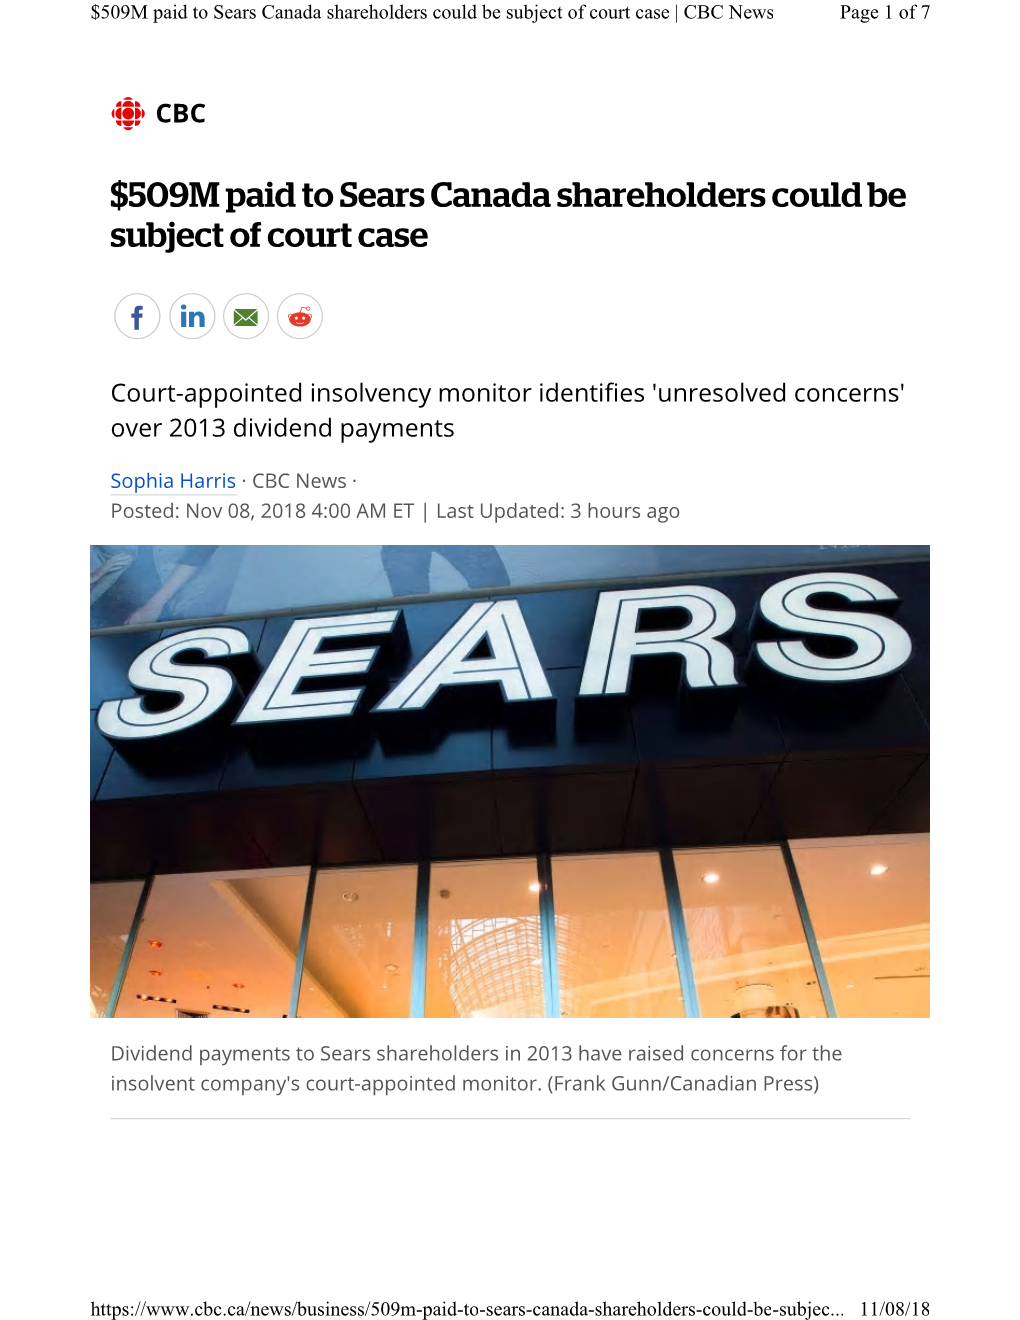 509M Paid to Sears Canada Shareholders Could Be Subject of Court Case | CBC News Page 1 of 7